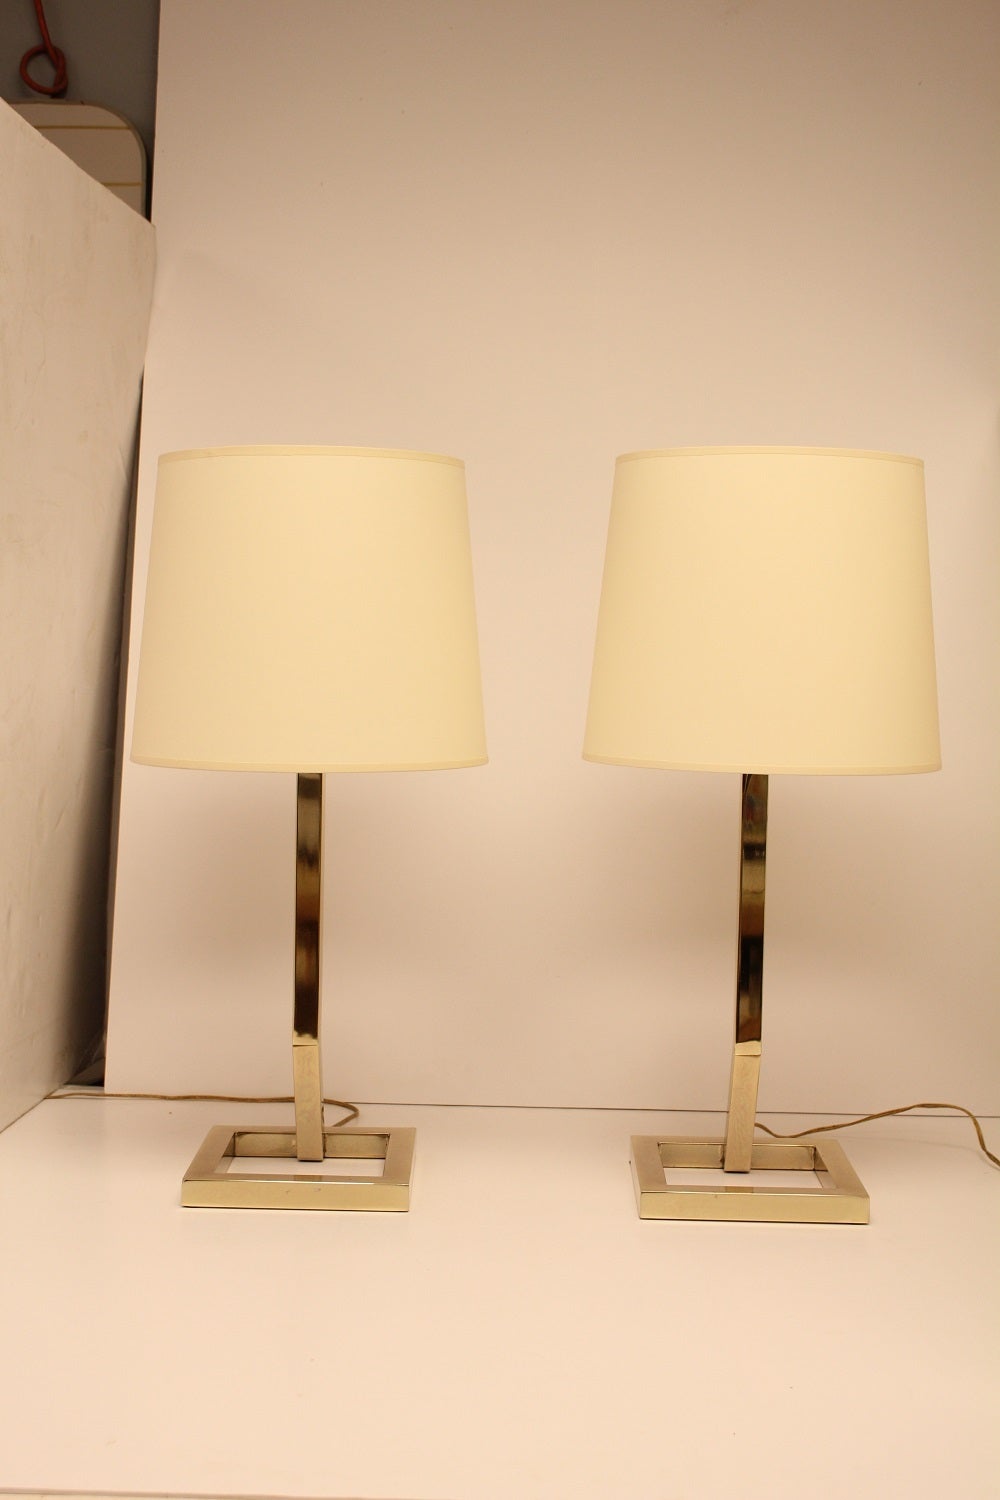 Stylish Modern Brass Table Lamps With Paper Shades. Shade H 12.5